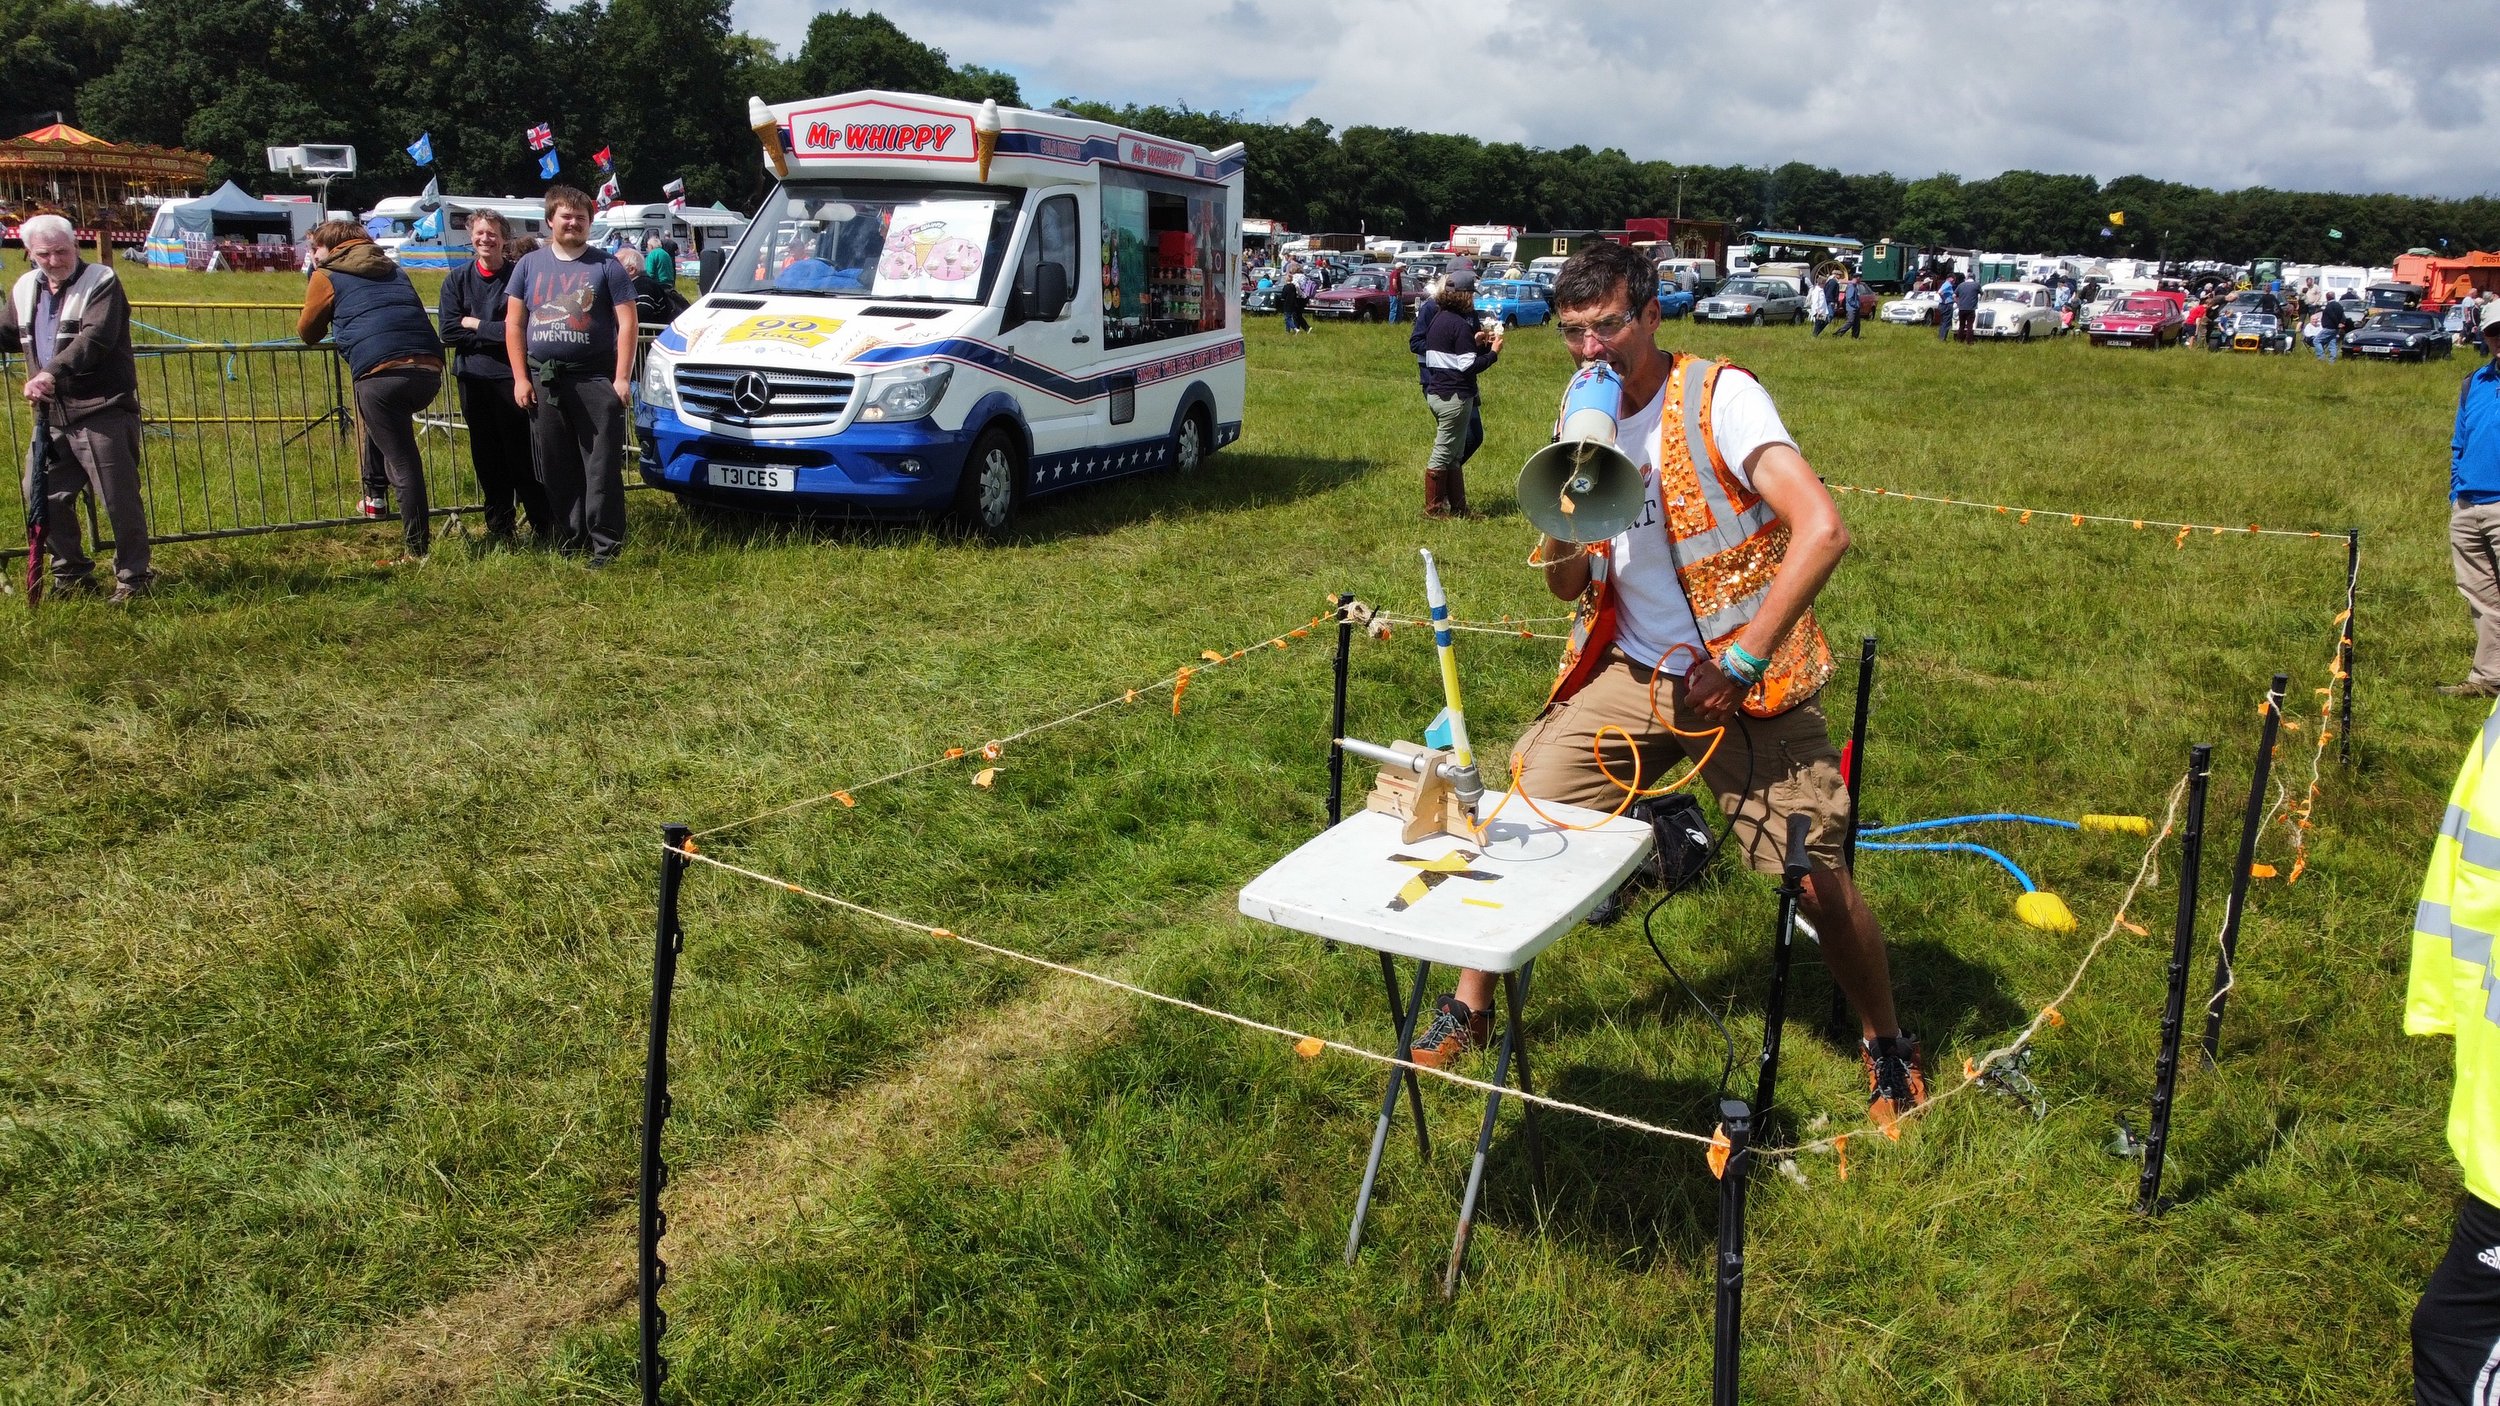 Nick Corston launches a paper rocket at the Duncombe Park Steam rally.JPG